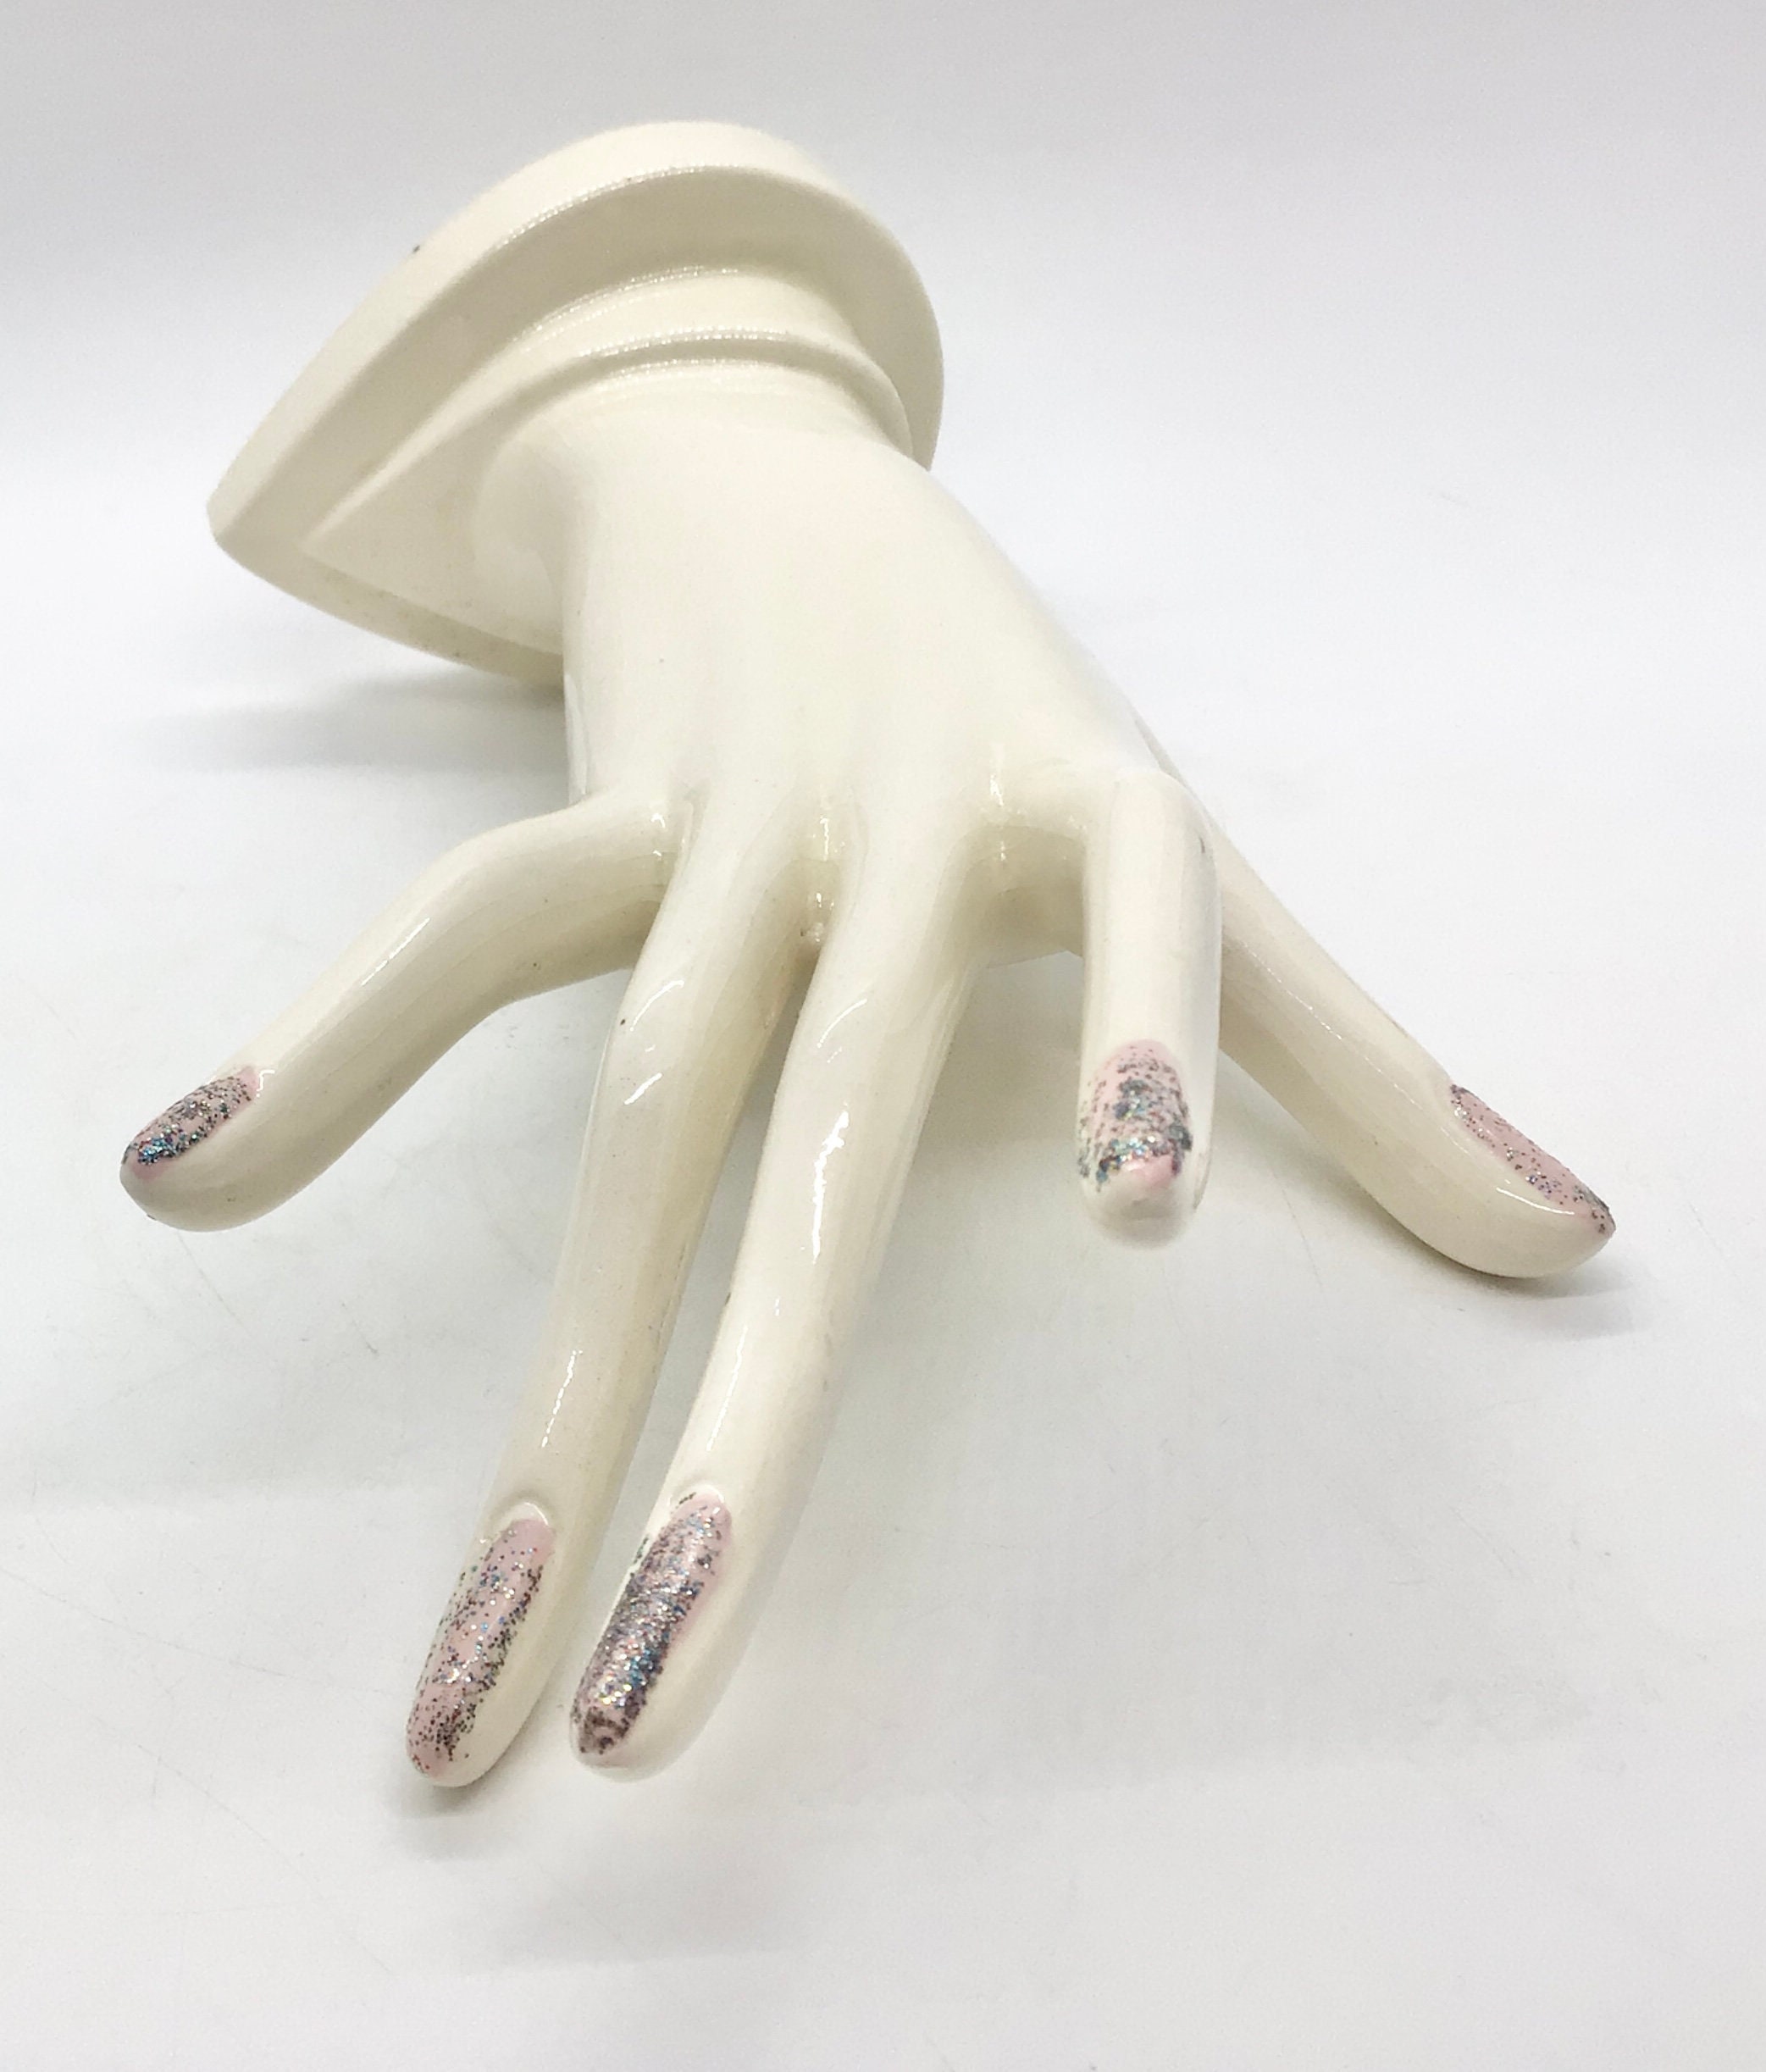 Practice Hand for Acrylic Nailsplastic Right Hand Mannequin,wood Grain  Effect Fingers Manikin Hand Model, Jewelry Display Props Ring Holder 